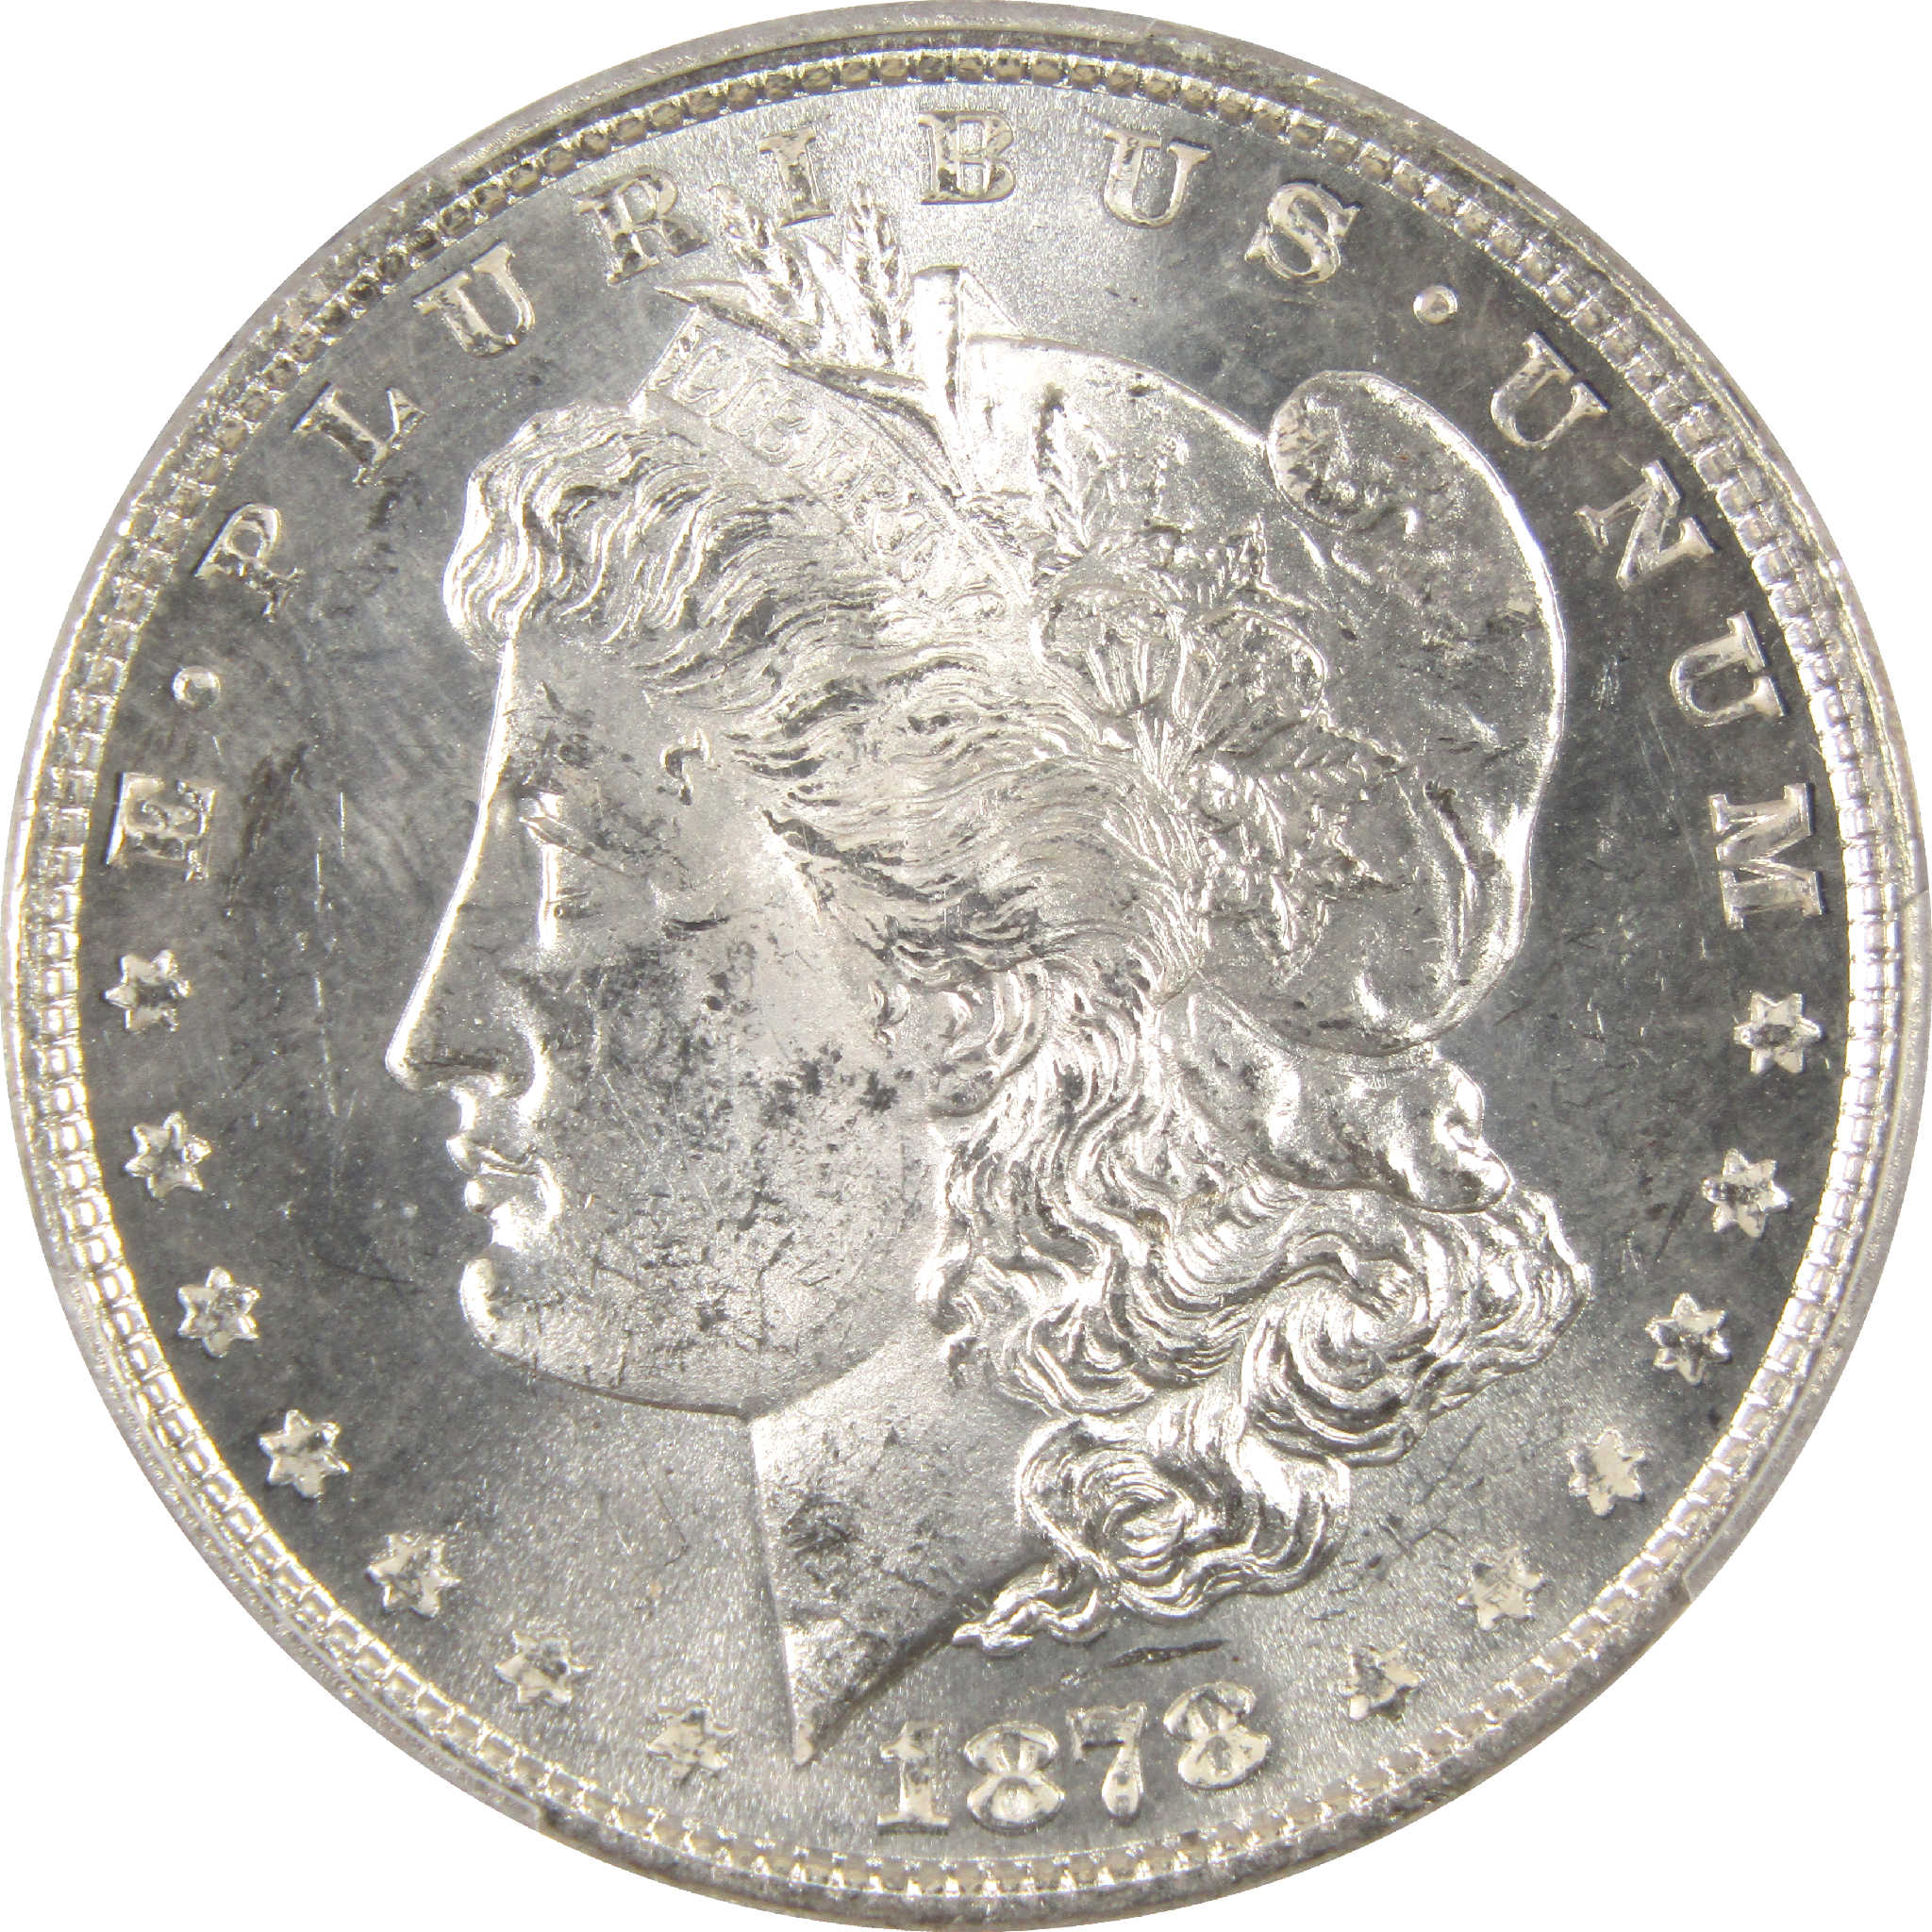 1878 8TF Morgan Dollar MS 63 PCGS Silver $1 Cracked Holder SKU:I11334 - Morgan coin - Morgan silver dollar - Morgan silver dollar for sale - Profile Coins &amp; Collectibles